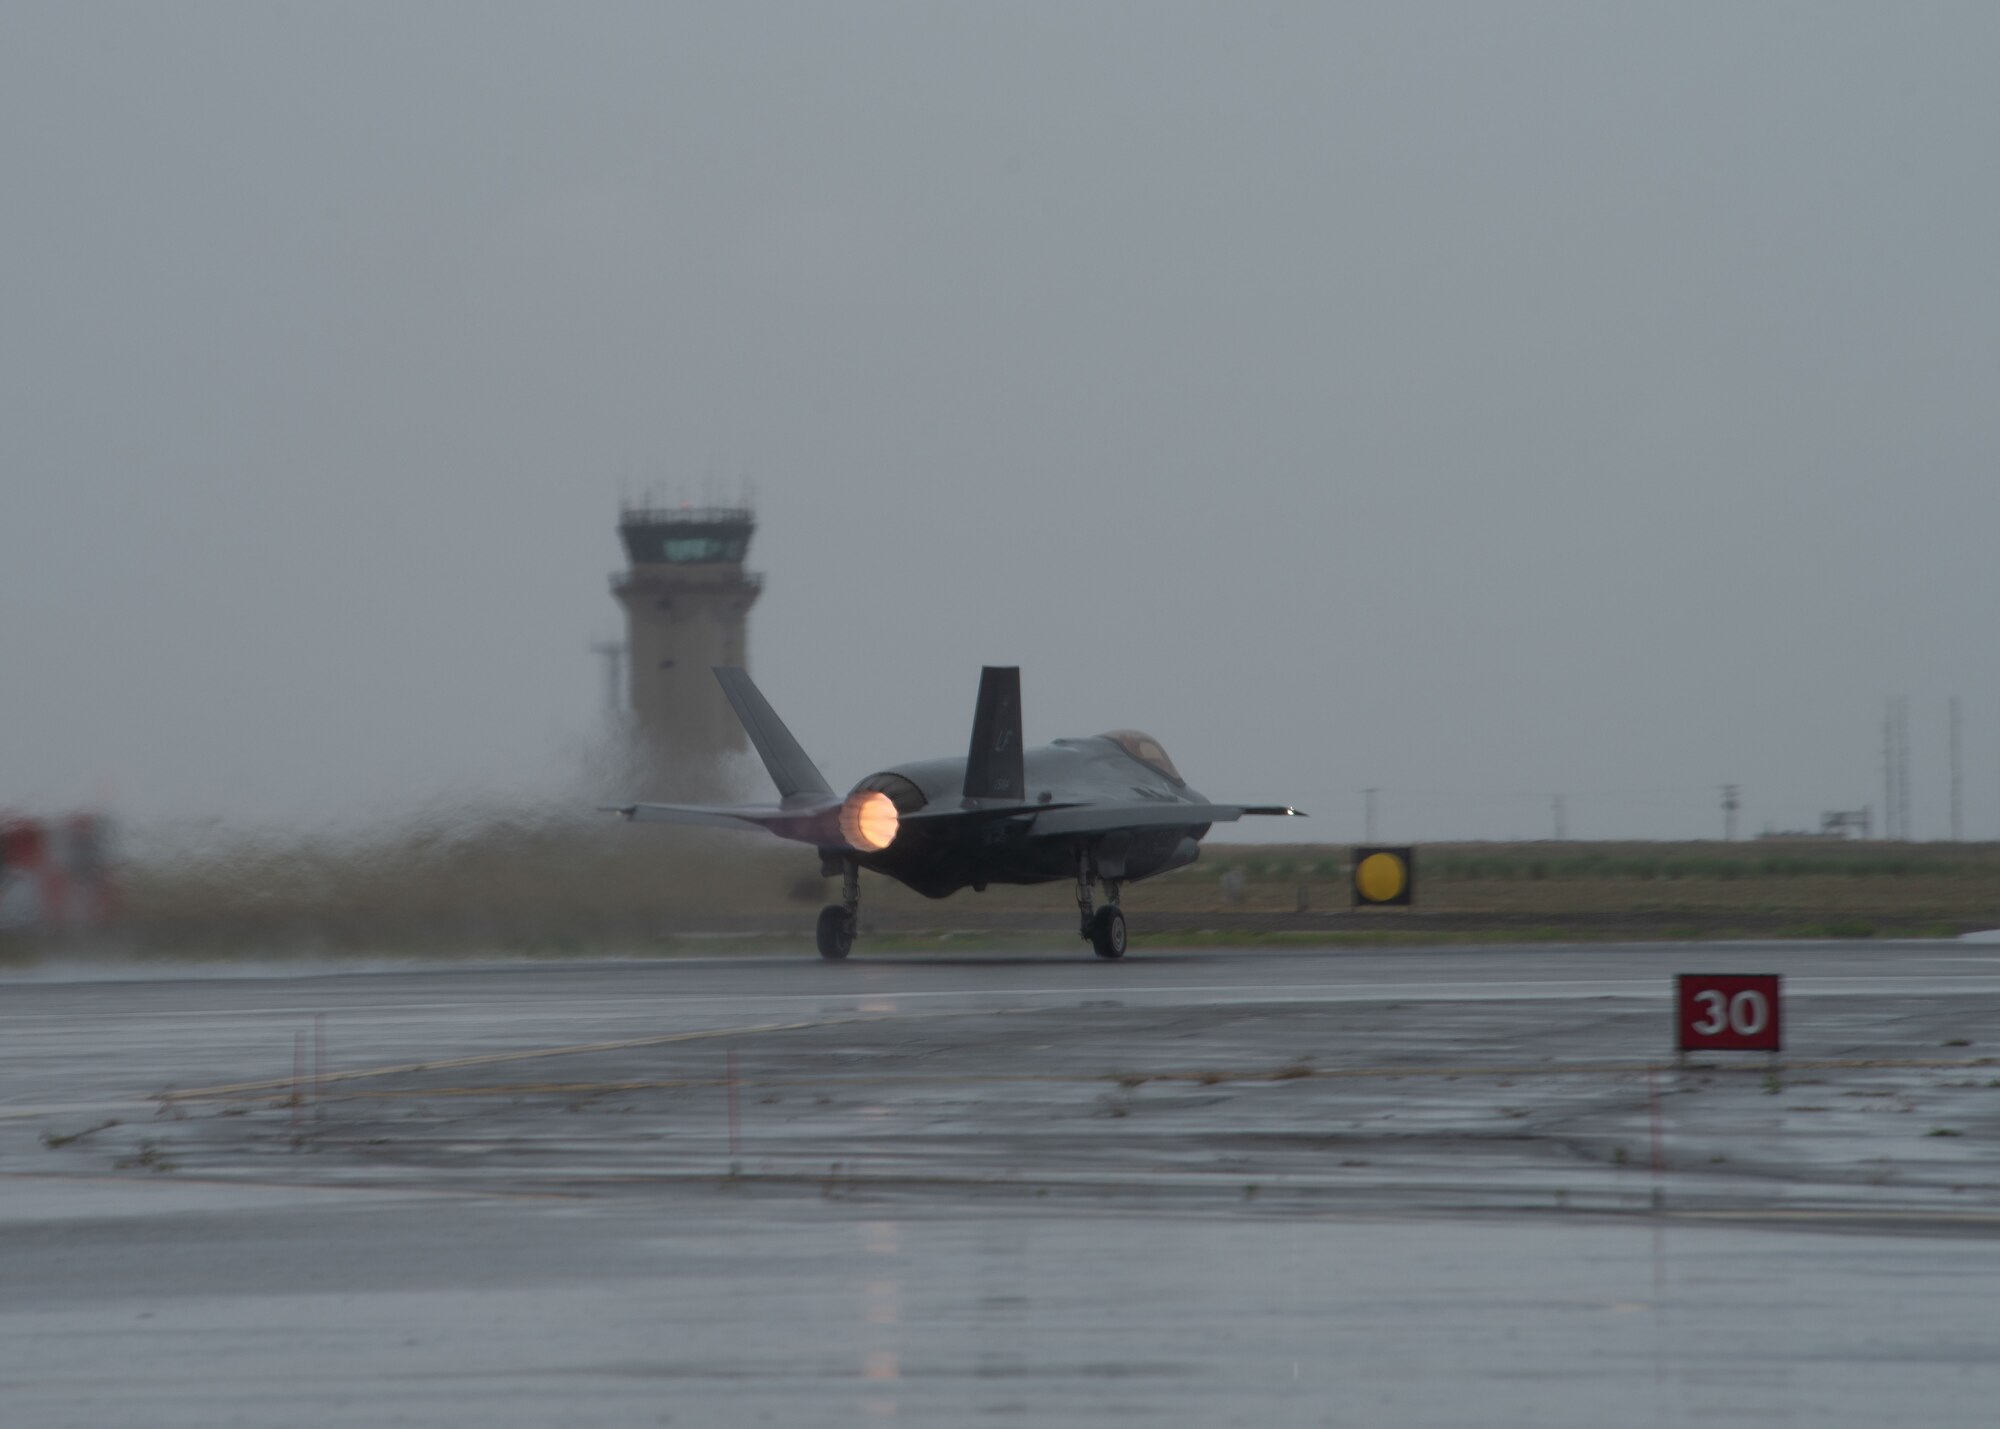 A F-35 jet aircraft speeds up in order to fly off the flight line runway.